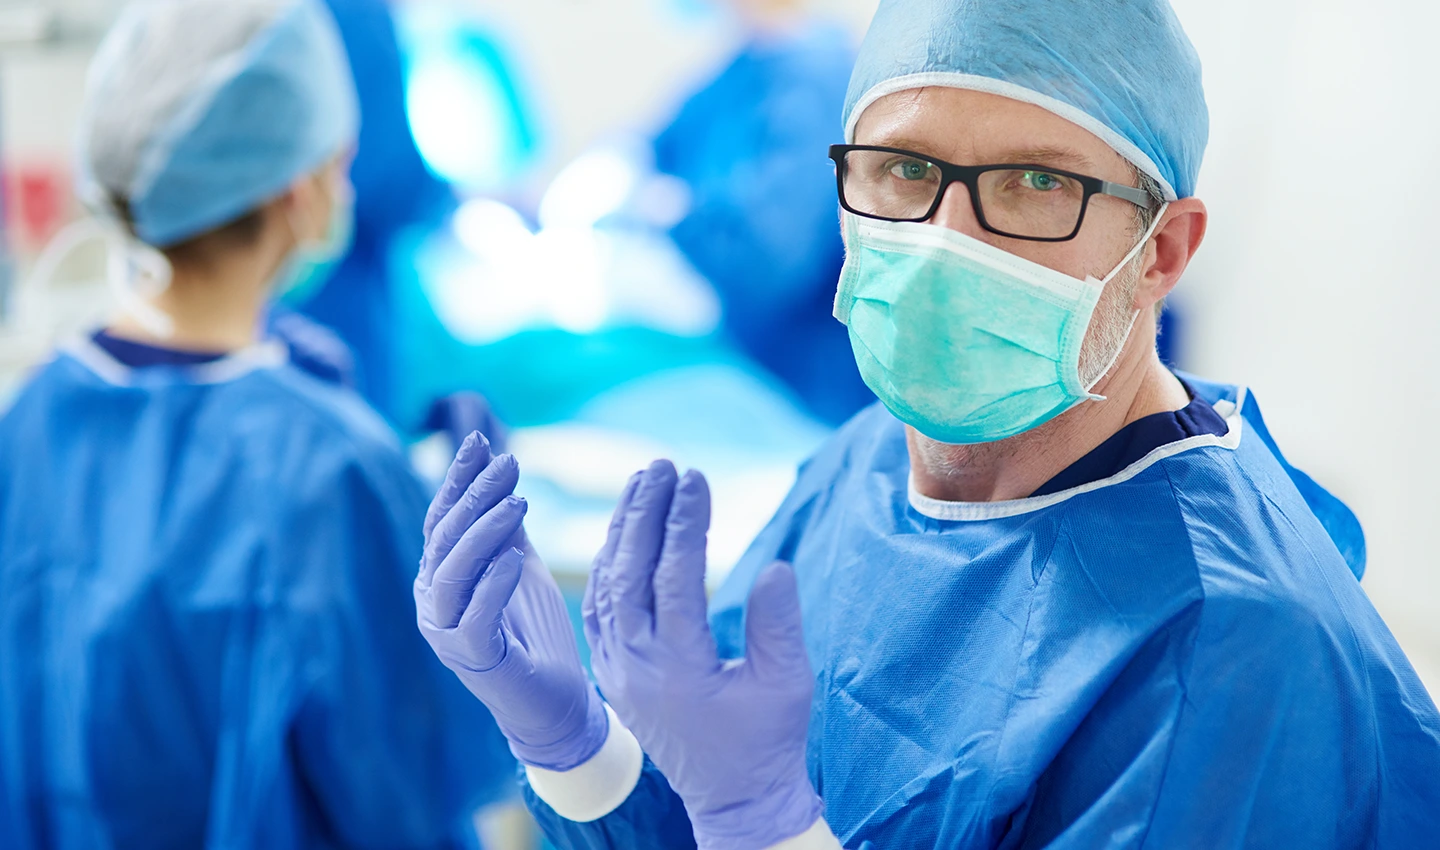 A doctor with Rhinoplasty Board Certification prepares for surgery.